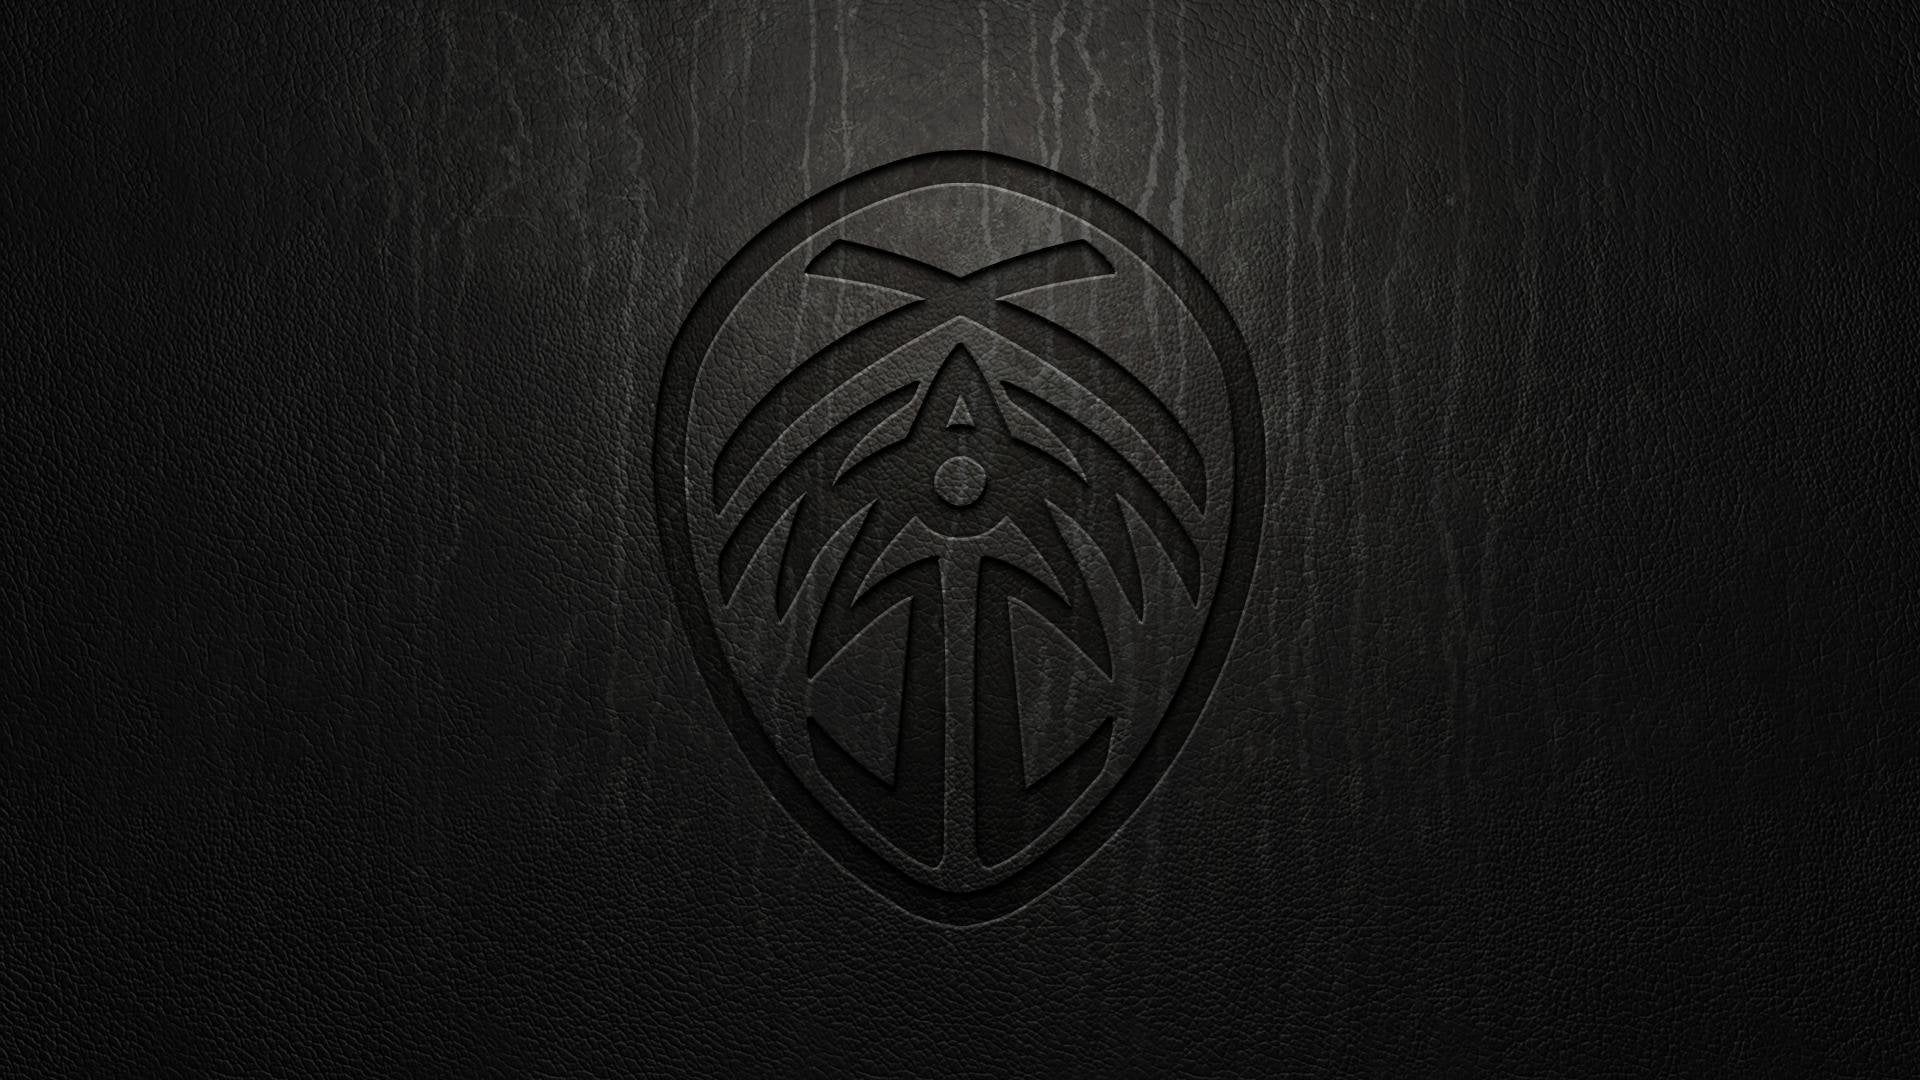 No Spoilers Bridge 4 and Stormlight Archive Symbol Wallpaper, Stormlight_Archive